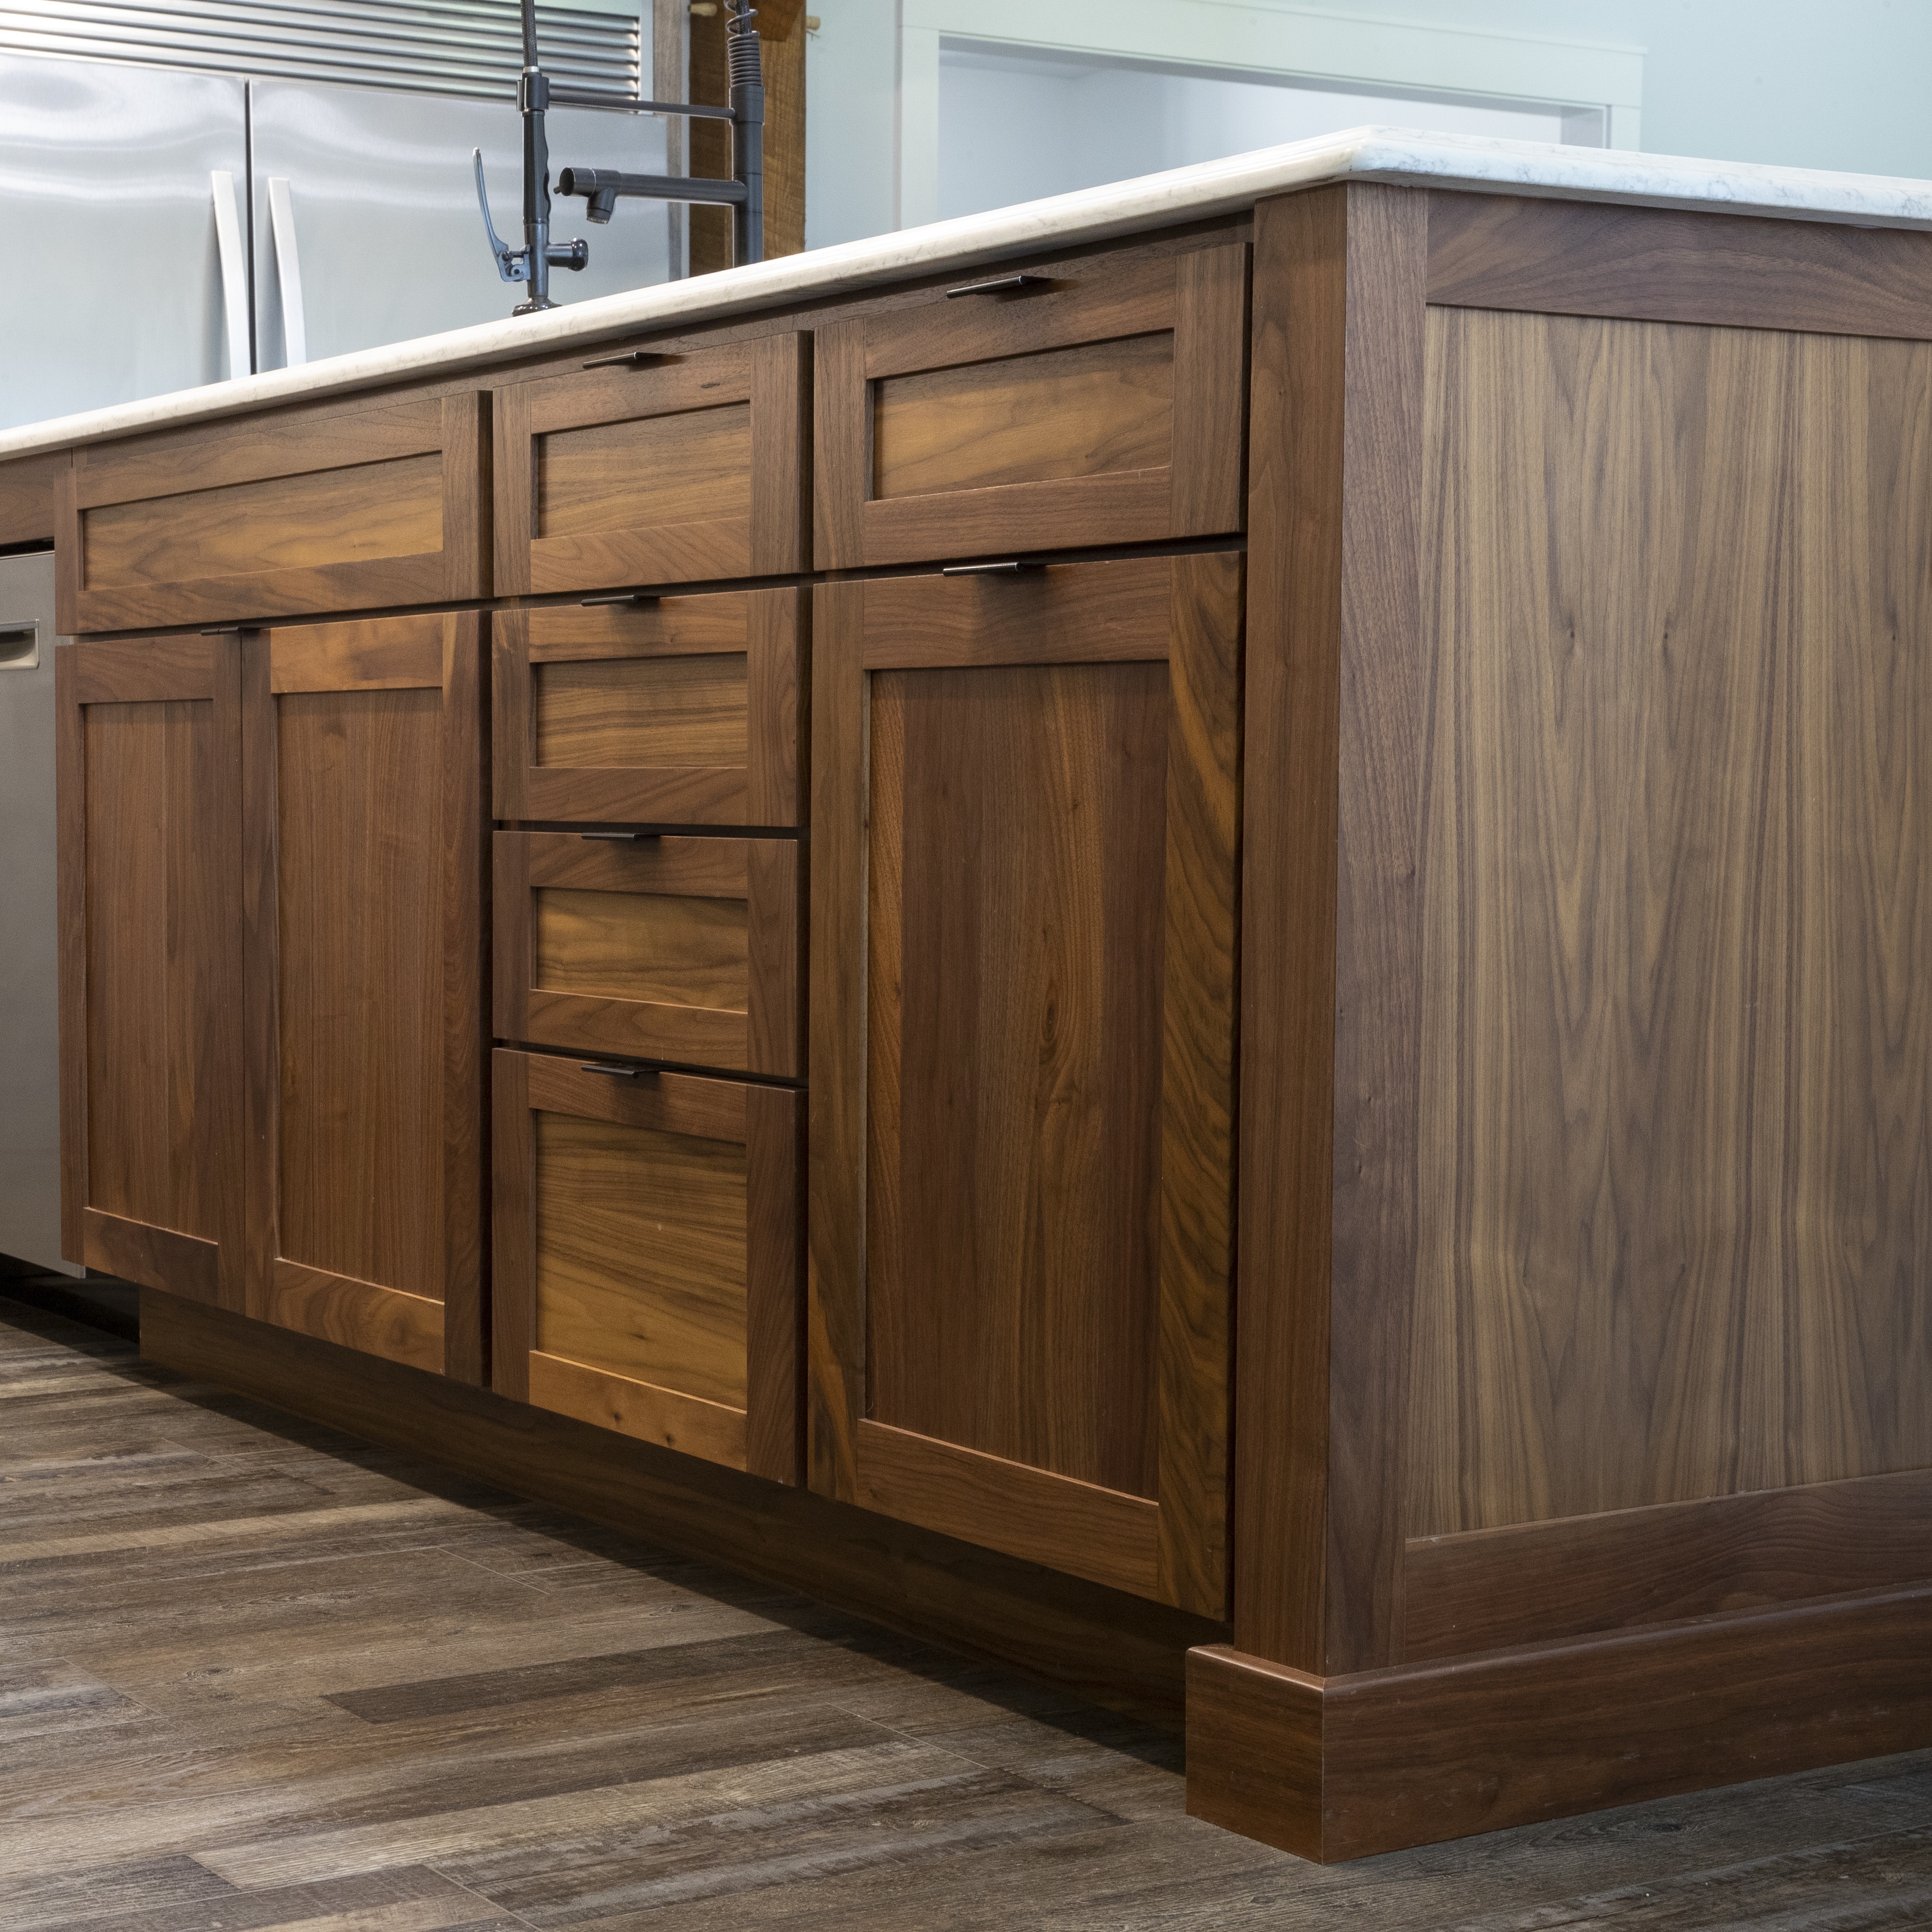 Coppes Cabinets kitchen center island